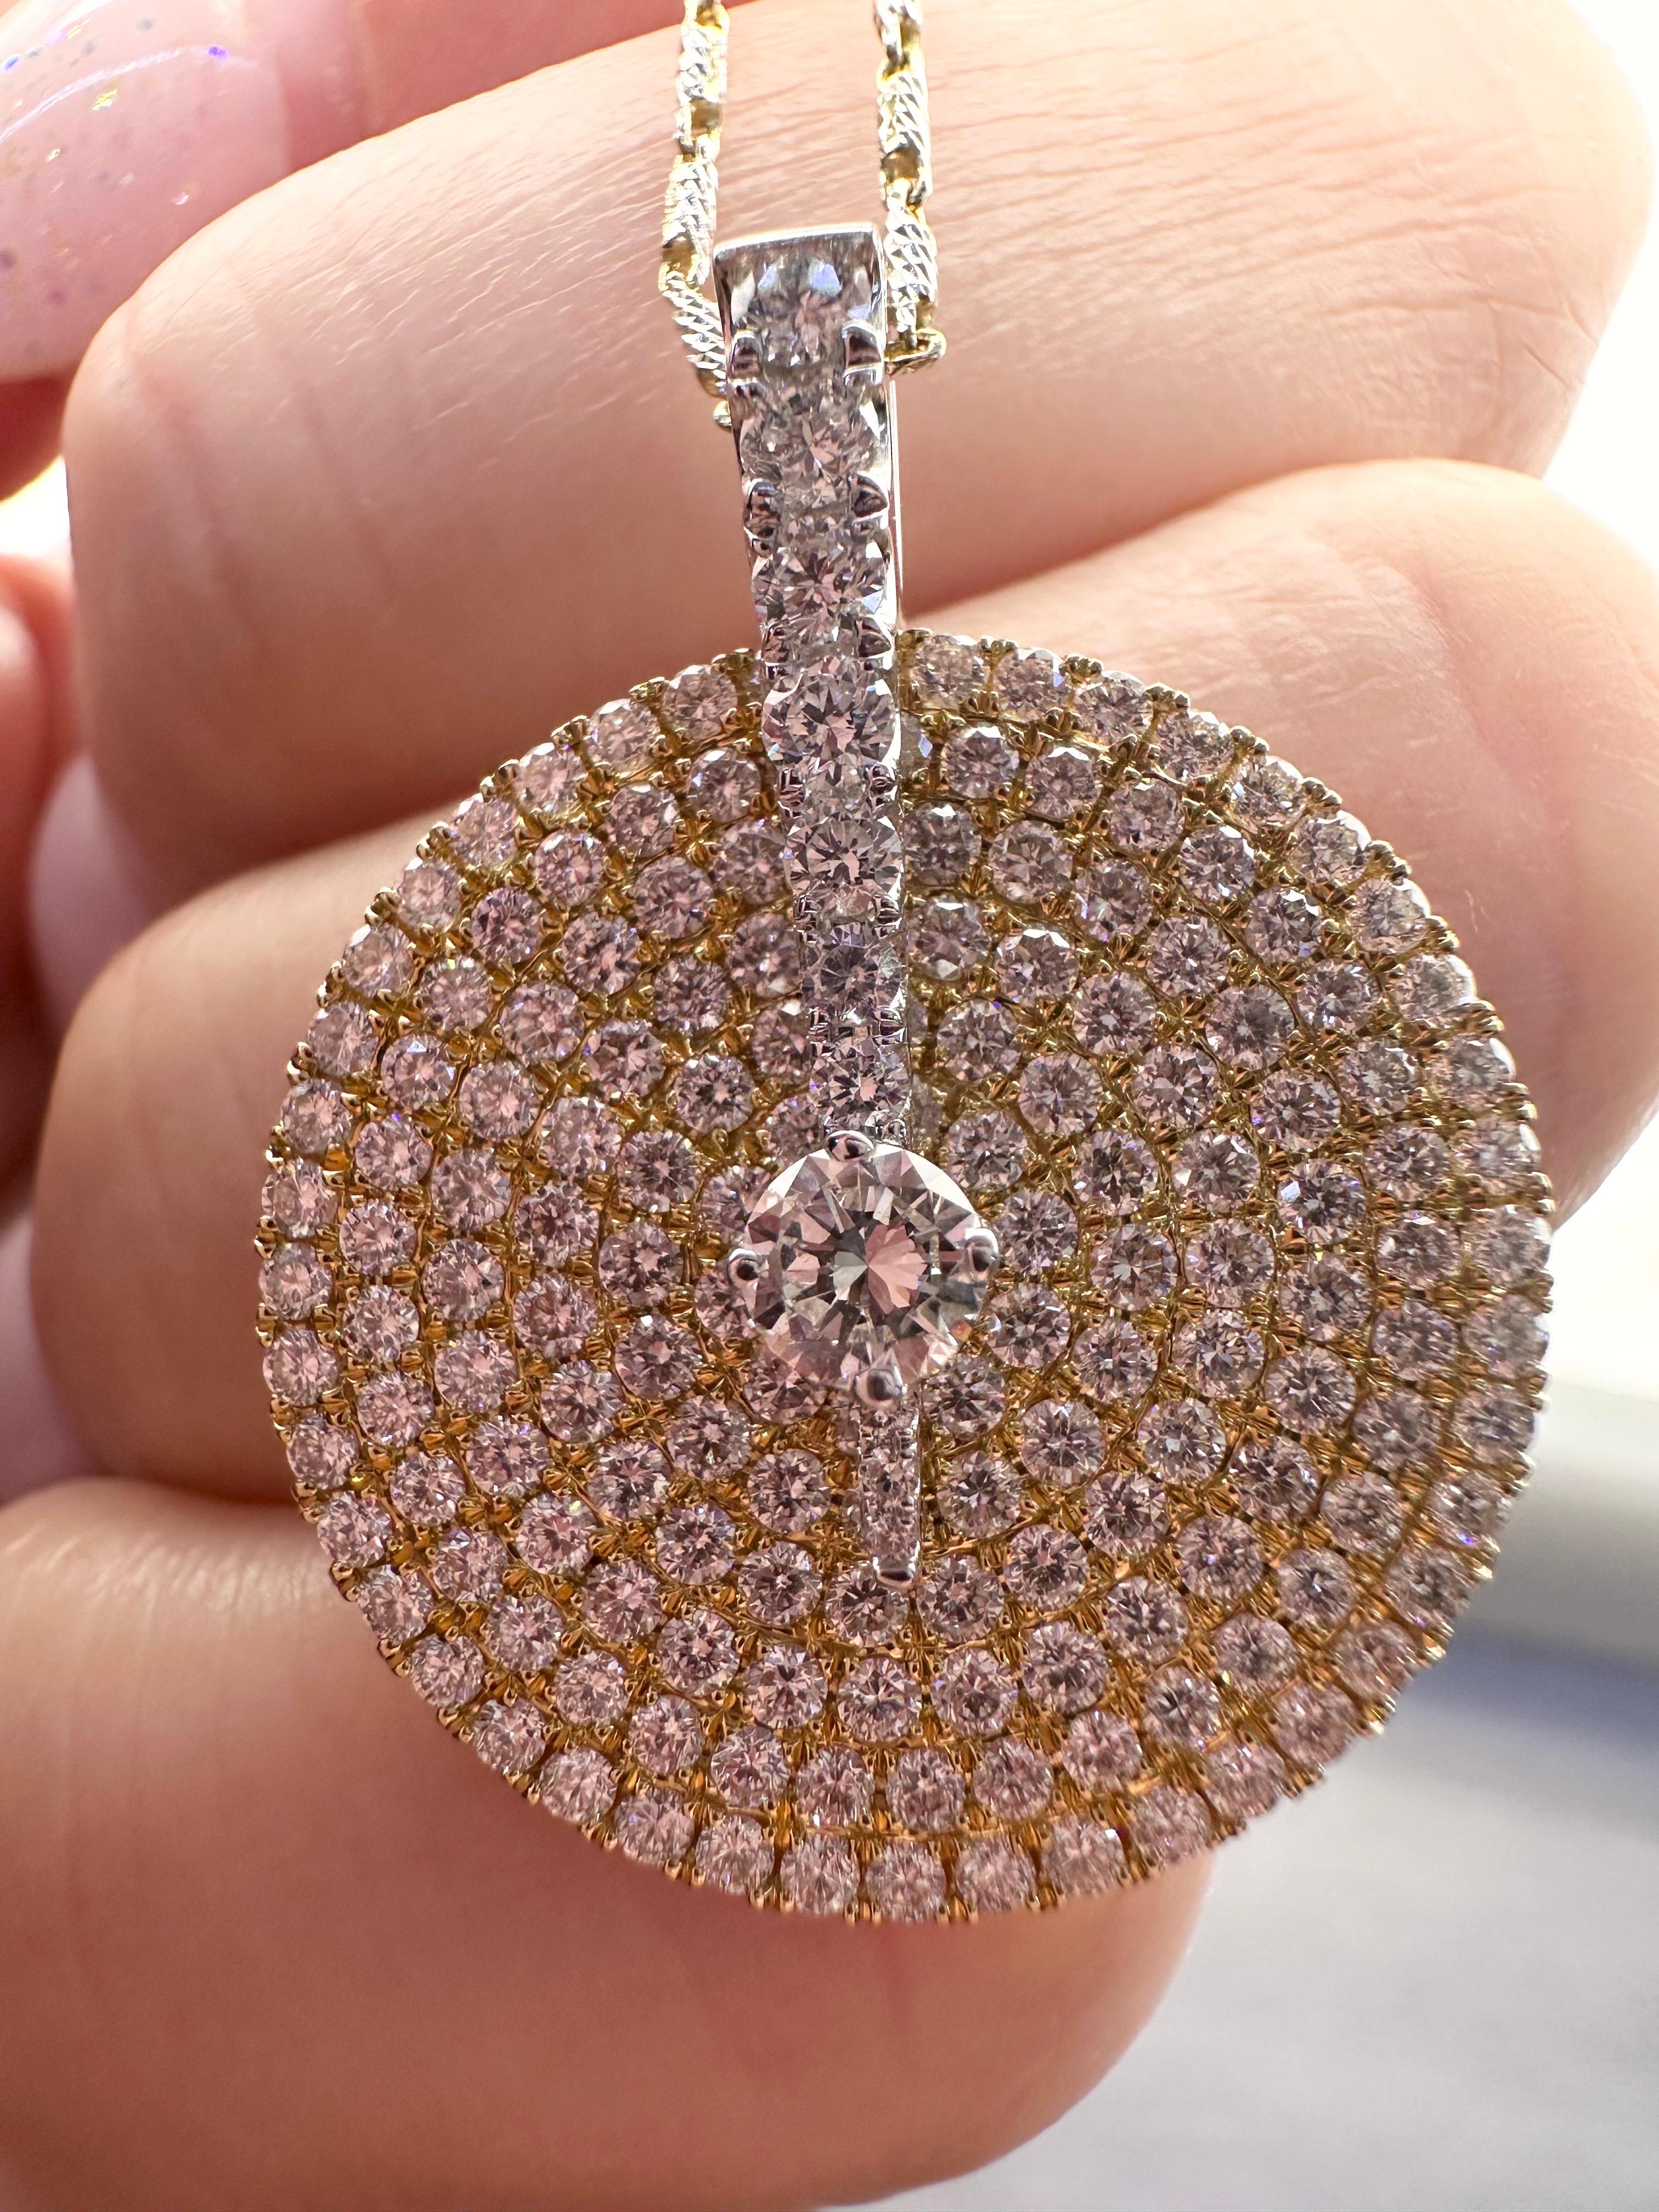 
Stunning moving pendant necklace in 18KT yellow gold made with 1.20 ct of diamonds VS clarity and F color. Chain is 18